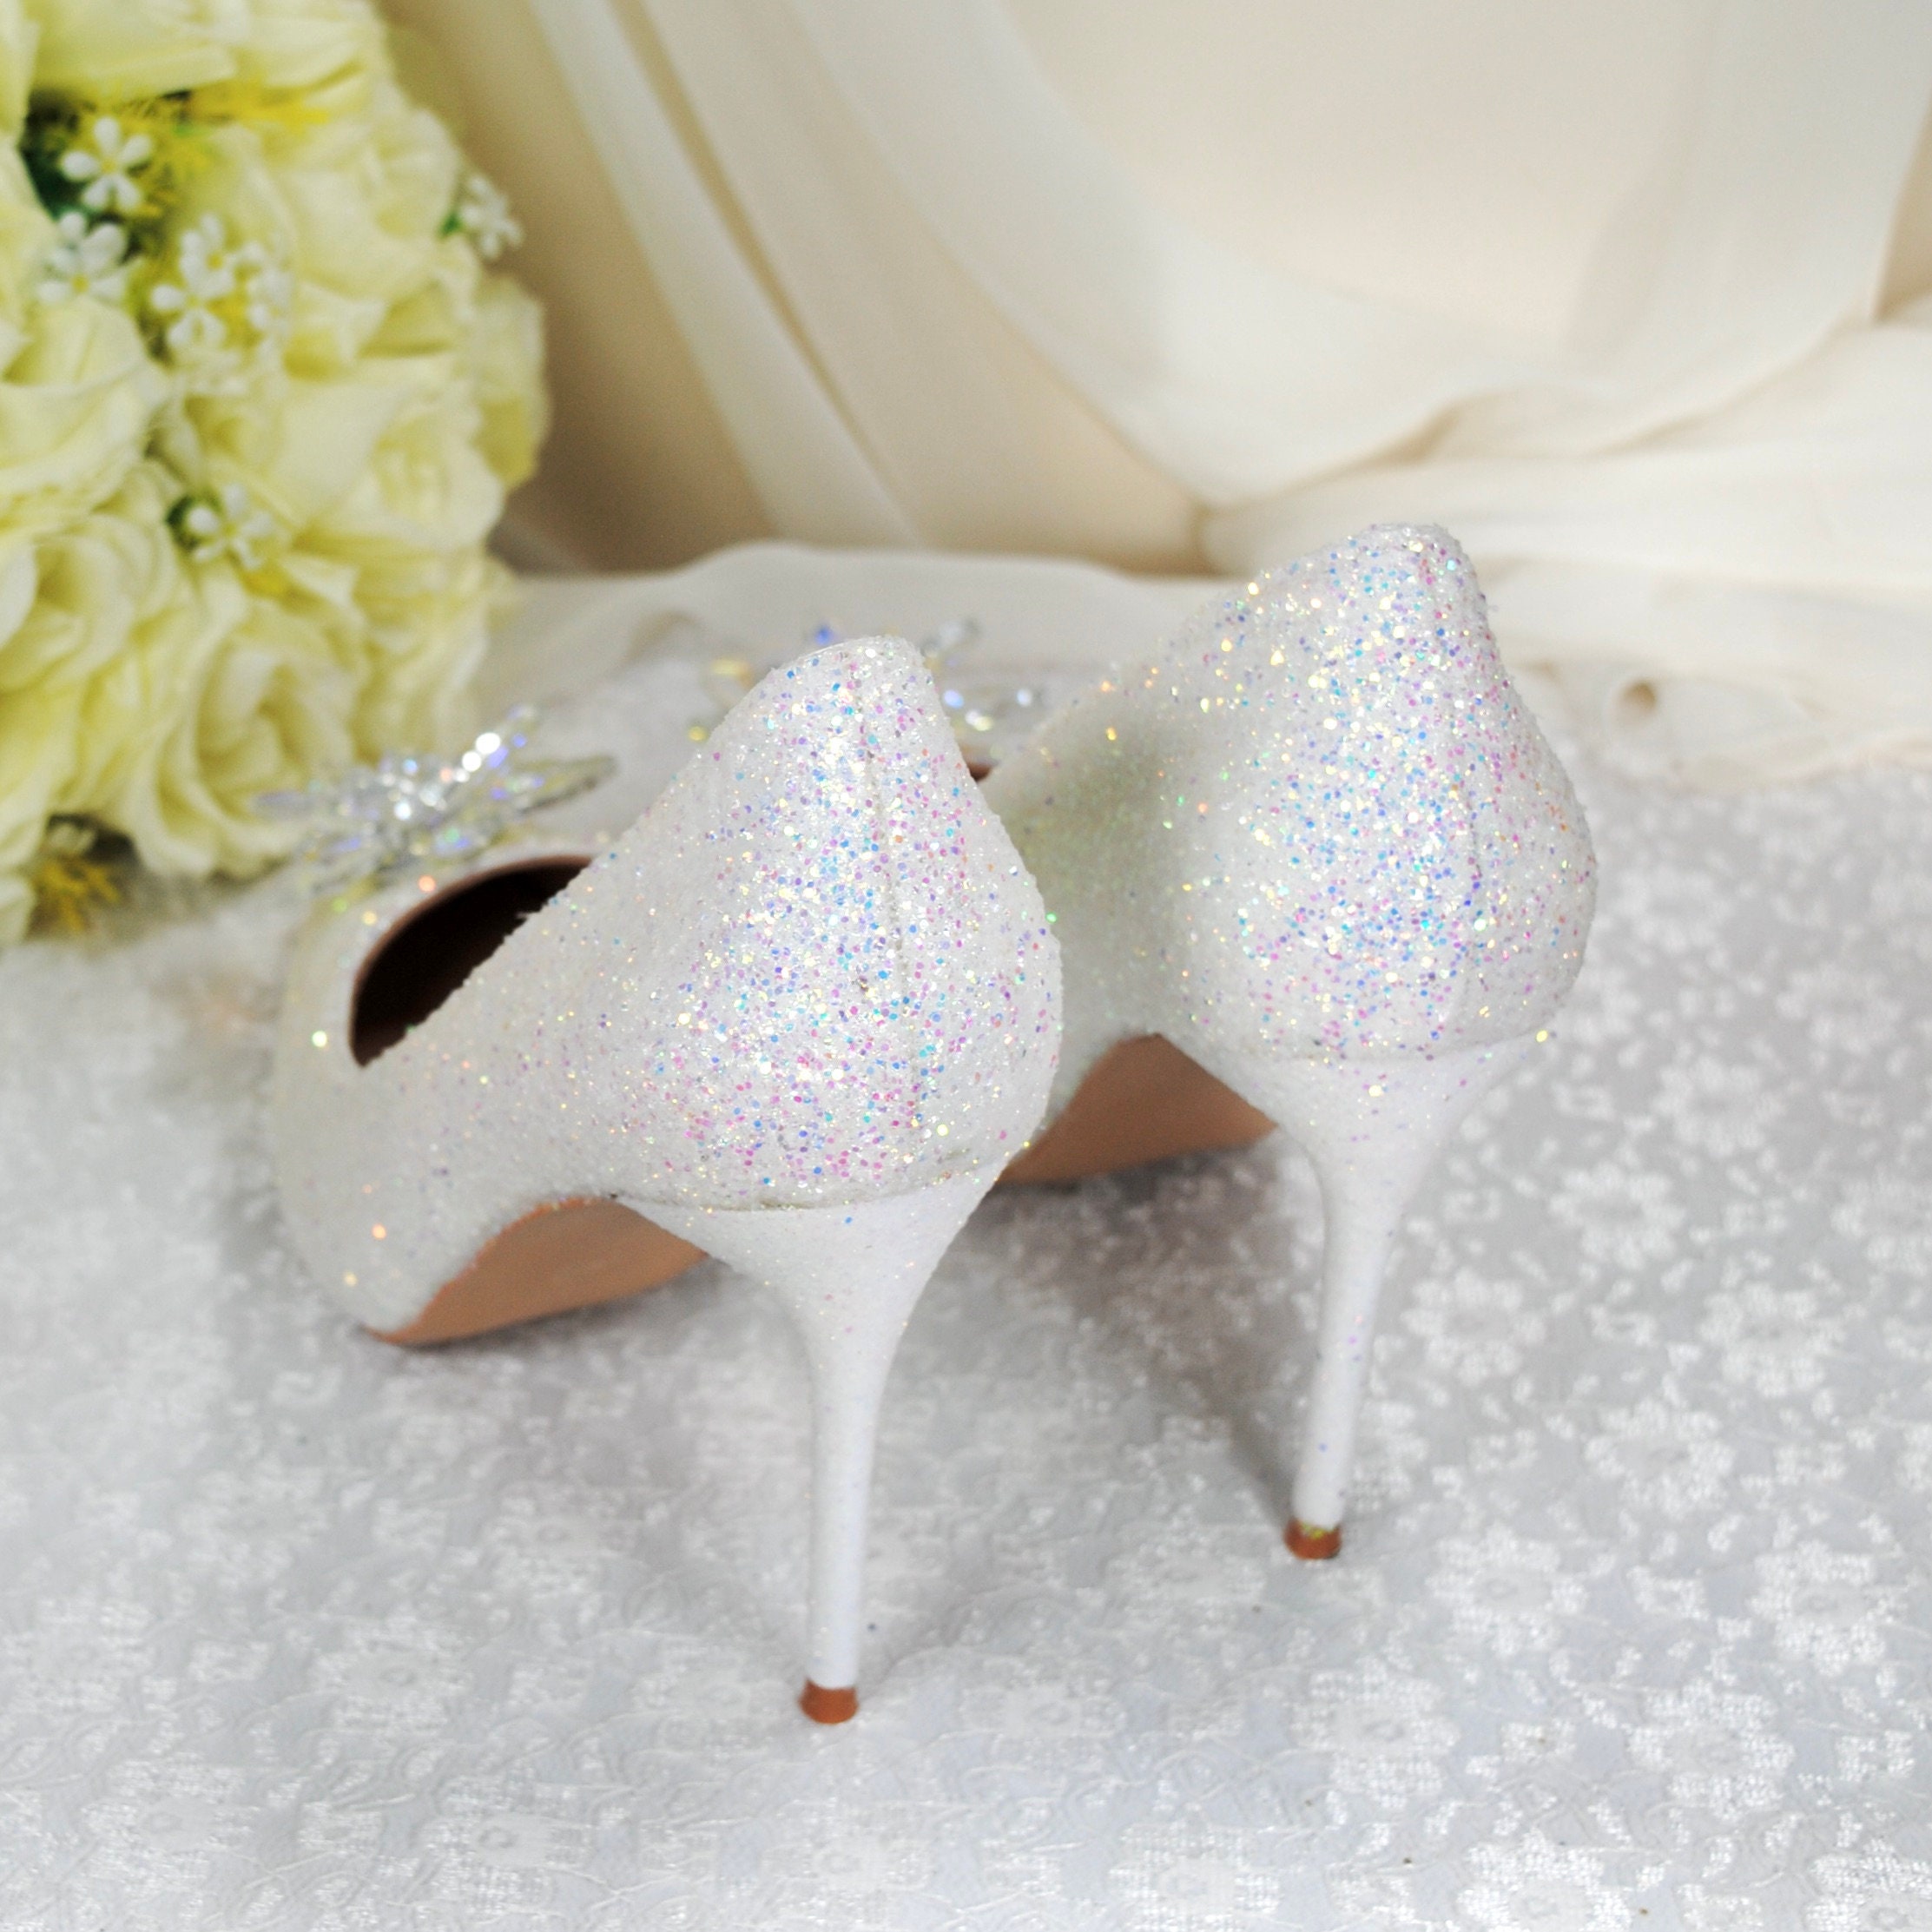 Designer Dresses Shoes Women High Heels Wedding Silver Cinderella Shoes  Sexy Lady Crystal Platforms Silver Glitter Diamonds Bridal Shoes From  Dresses88, $60.3